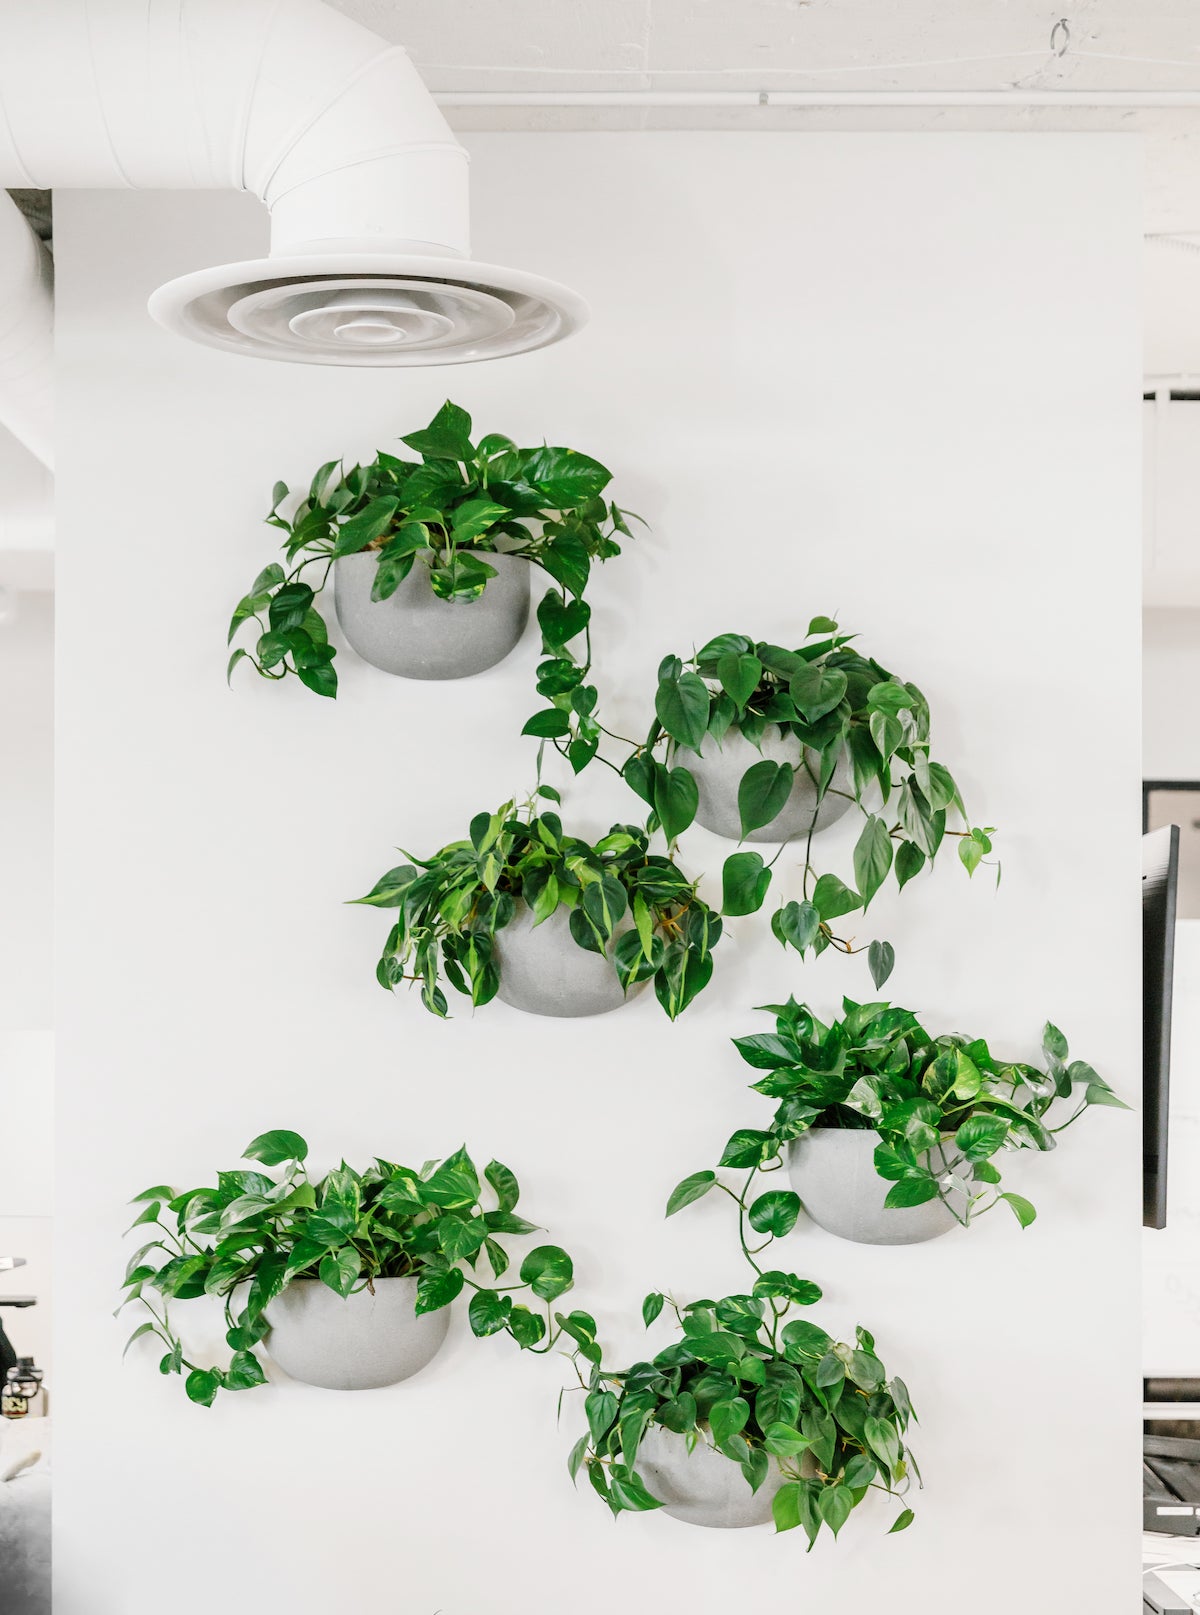 A living wall featuring potted plants down a column in the center of the Artifact Uprising office